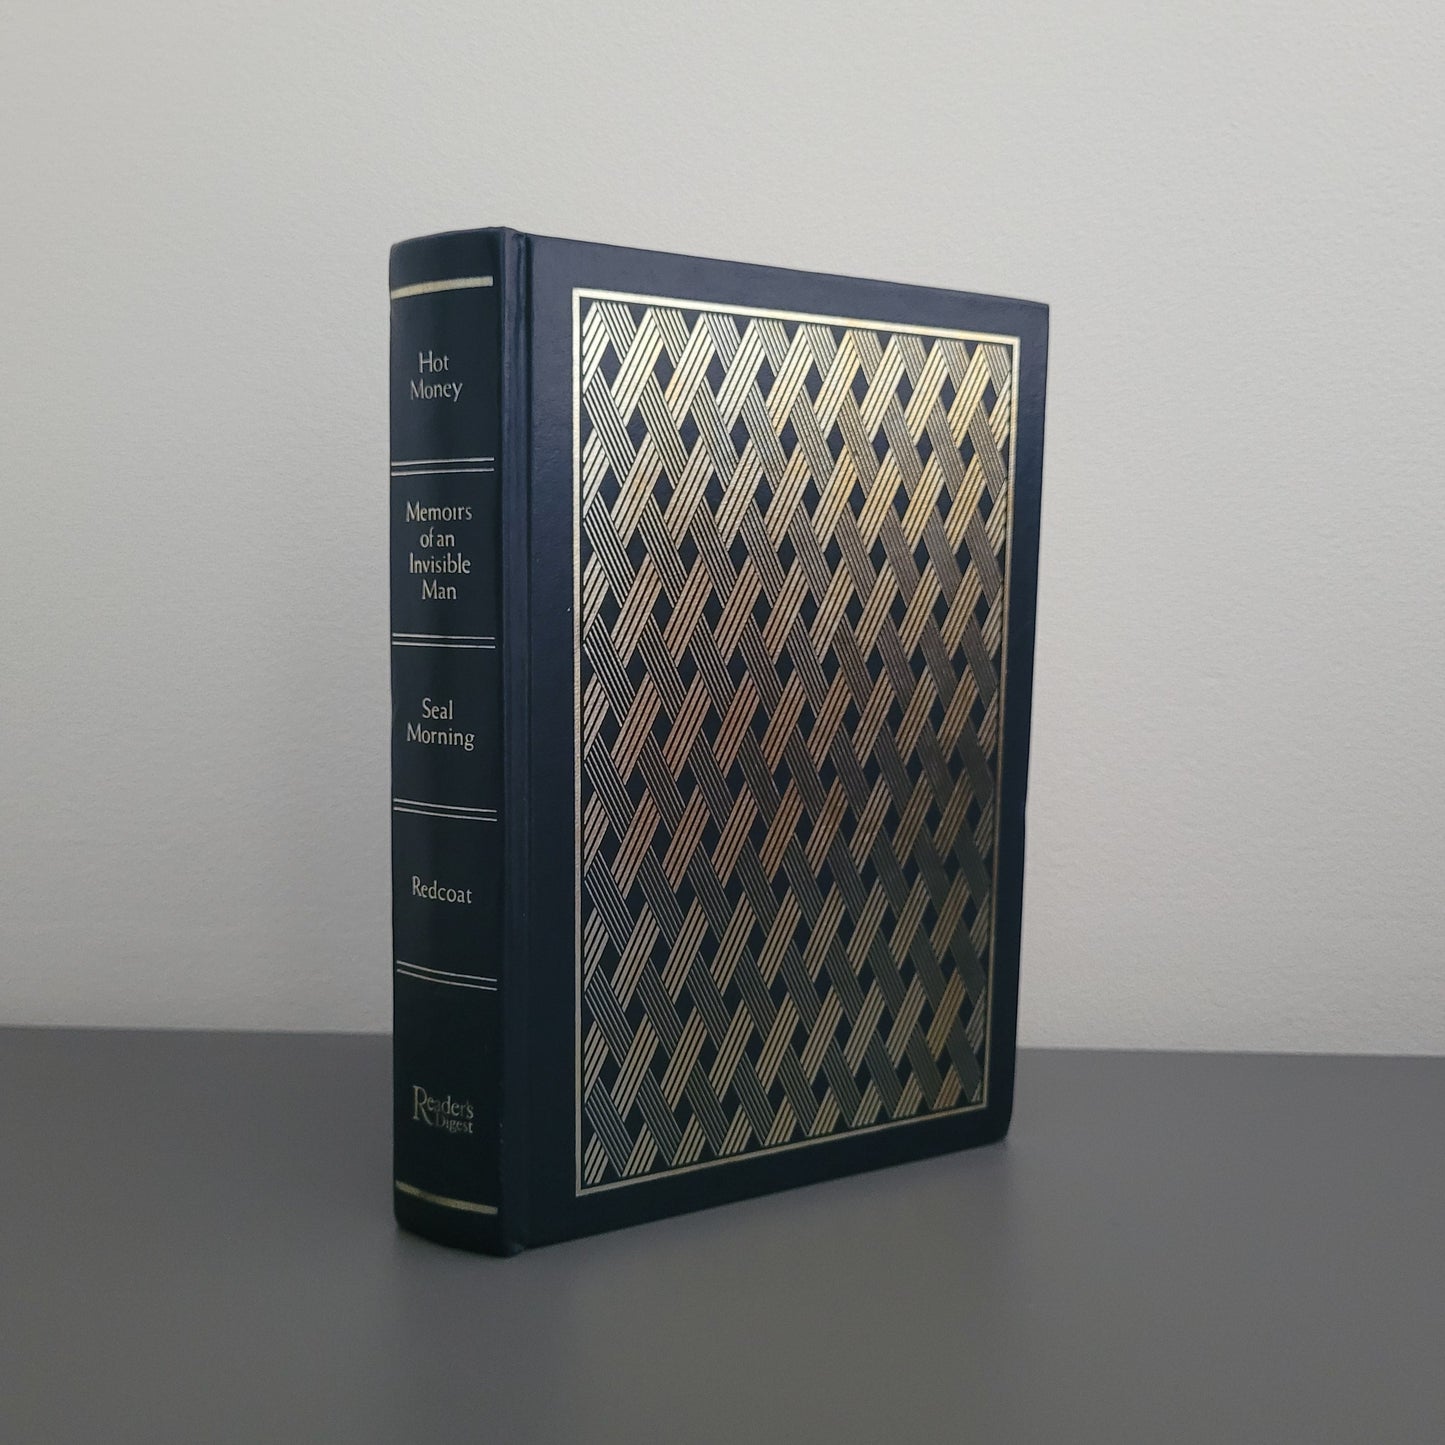 The front of the book fold - a blue hardback book with a shiny pattern on the cover.